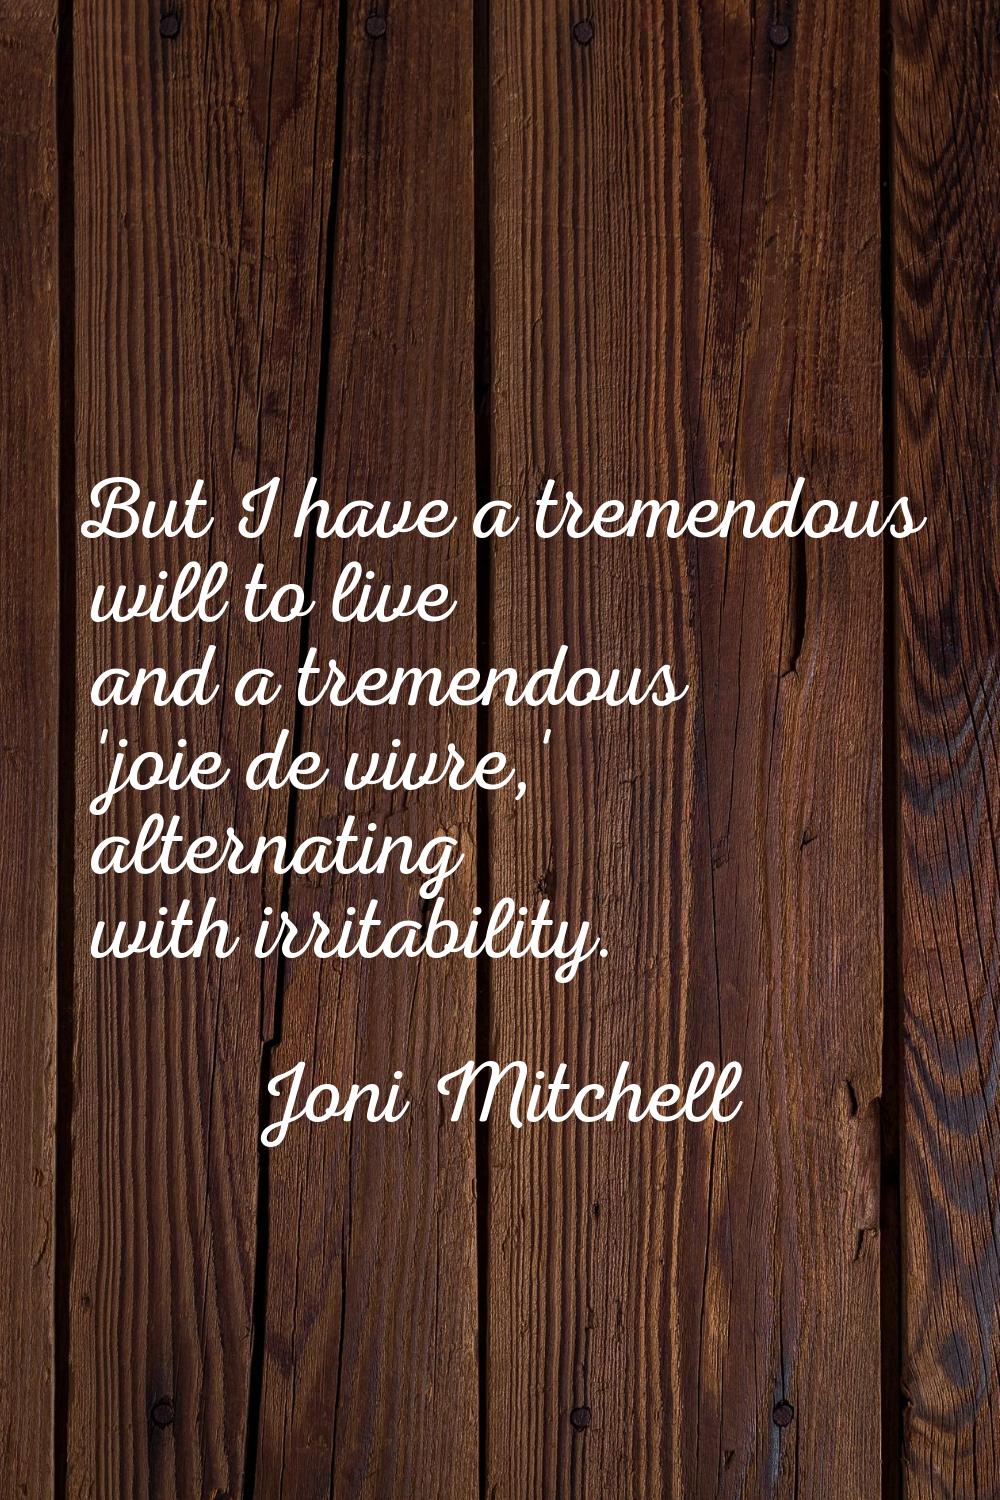 But I have a tremendous will to live and a tremendous 'joie de vivre,' alternating with irritabilit